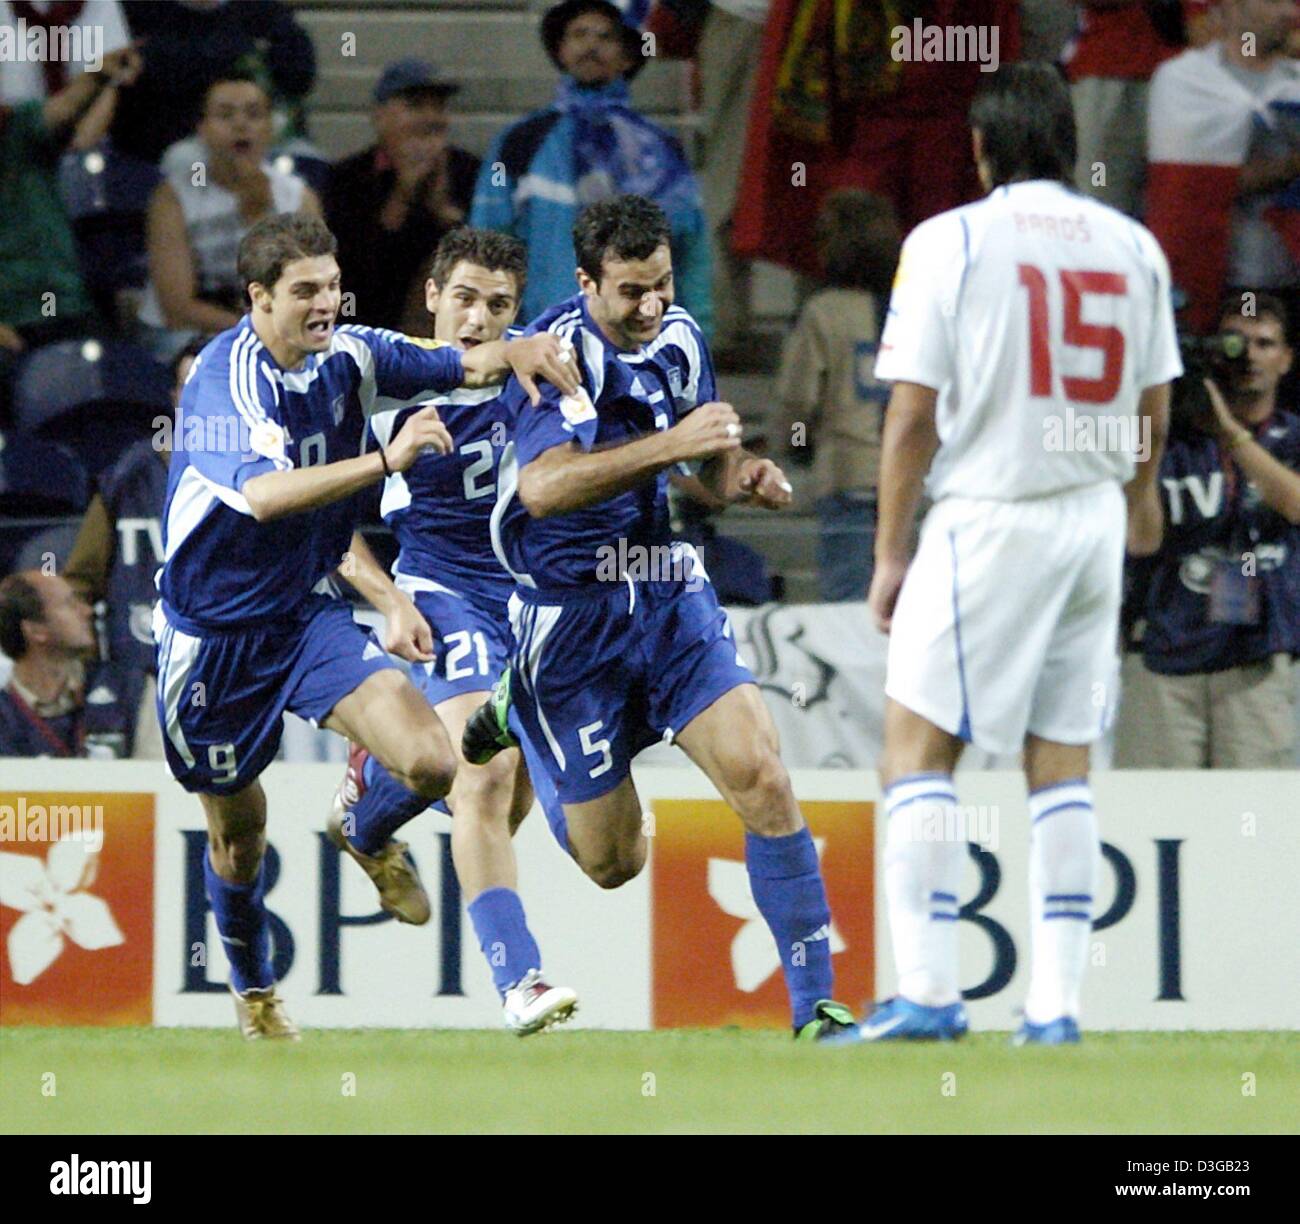 (dpa) - Greek defender Traianos Dellas (3rd from L) cheers and jubilates with his teammates Konstantinos Katsouranis (2nd from L) and Angelos Charisteas (L) after scoring the winning 1-0 silver goal, while Czech forward Milan Baros looks on during the Soccer Euro 2004 semifinal match between Greece and the Czech Republic in Porto, Portugal, 1 July 2004. Greece qualified for the Eur Stock Photo